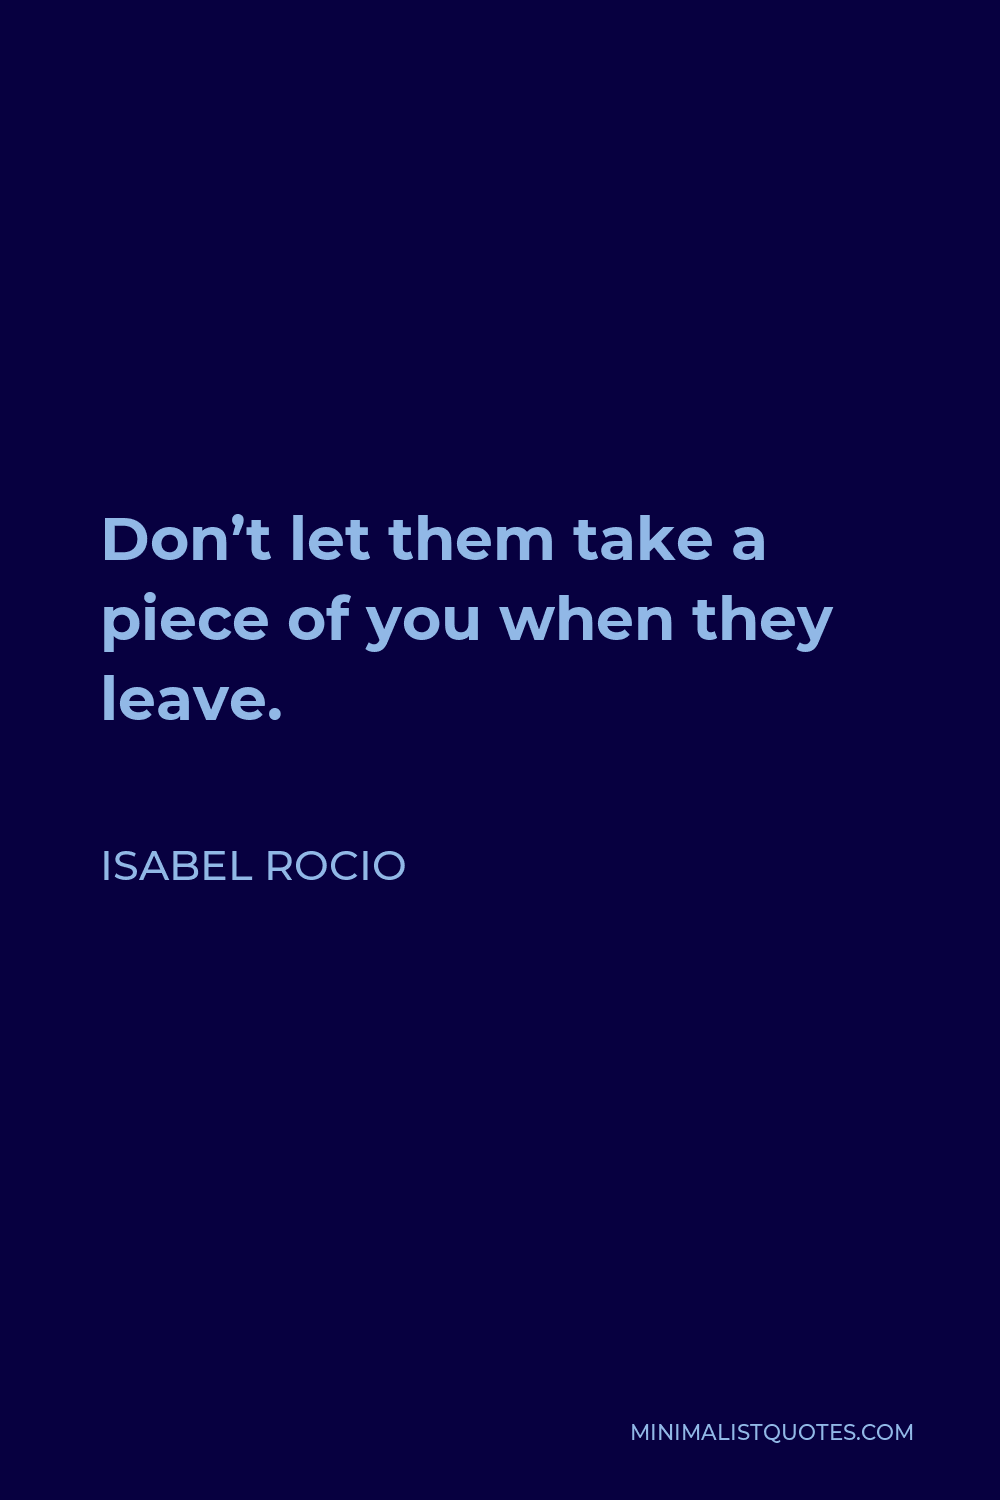 Isabel Rocio Quote - Don’t let them take a piece of you when they leave.